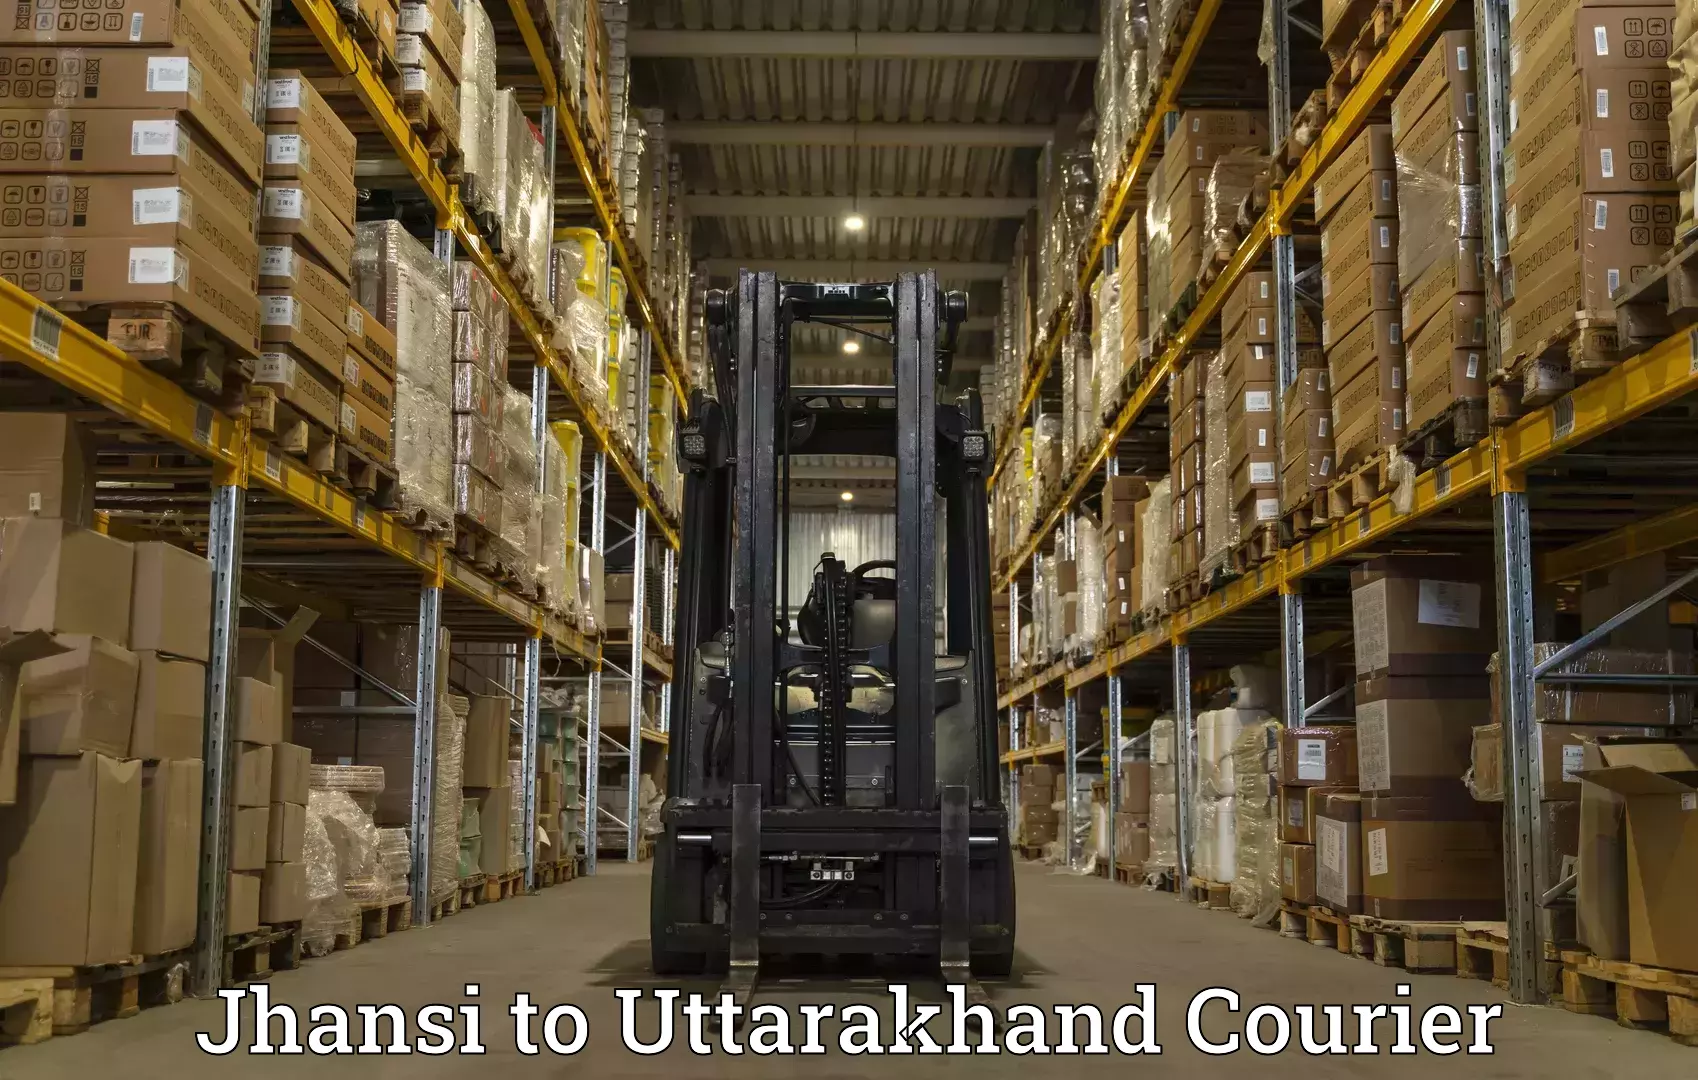 High-priority parcel service Jhansi to Rudrapur